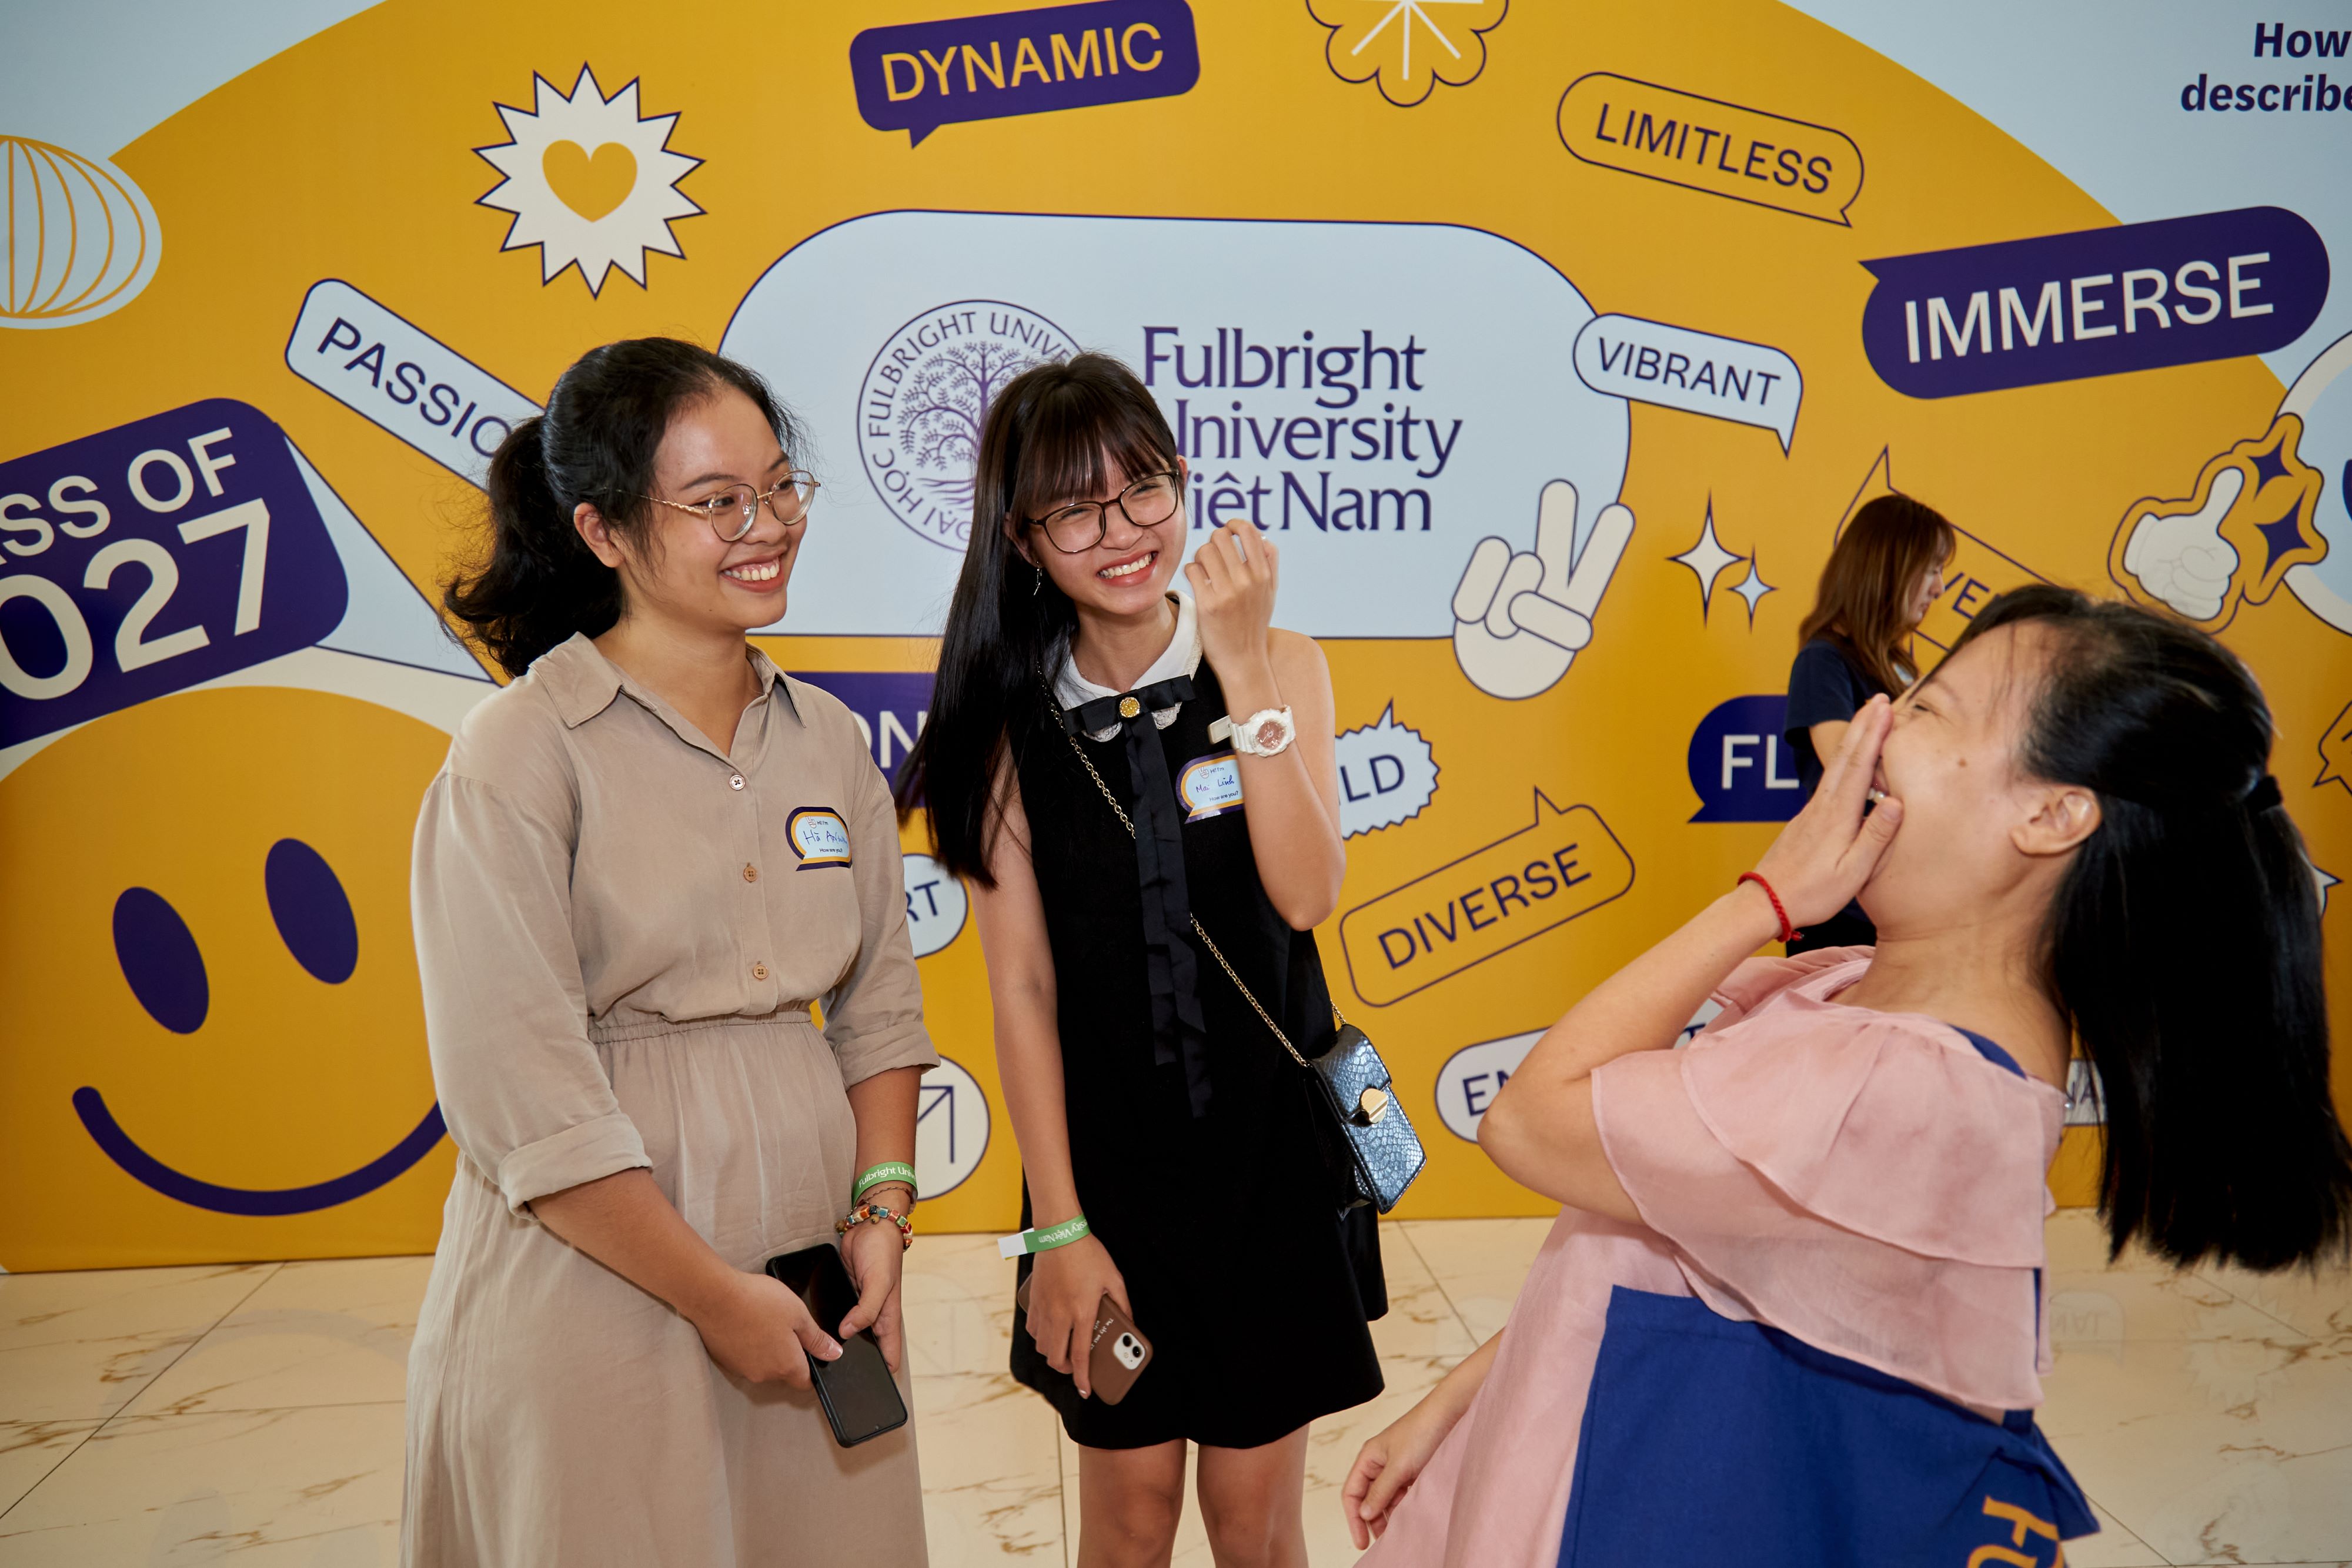 Fulbright alumni and teacher conversing on Fulbright Convocation Day